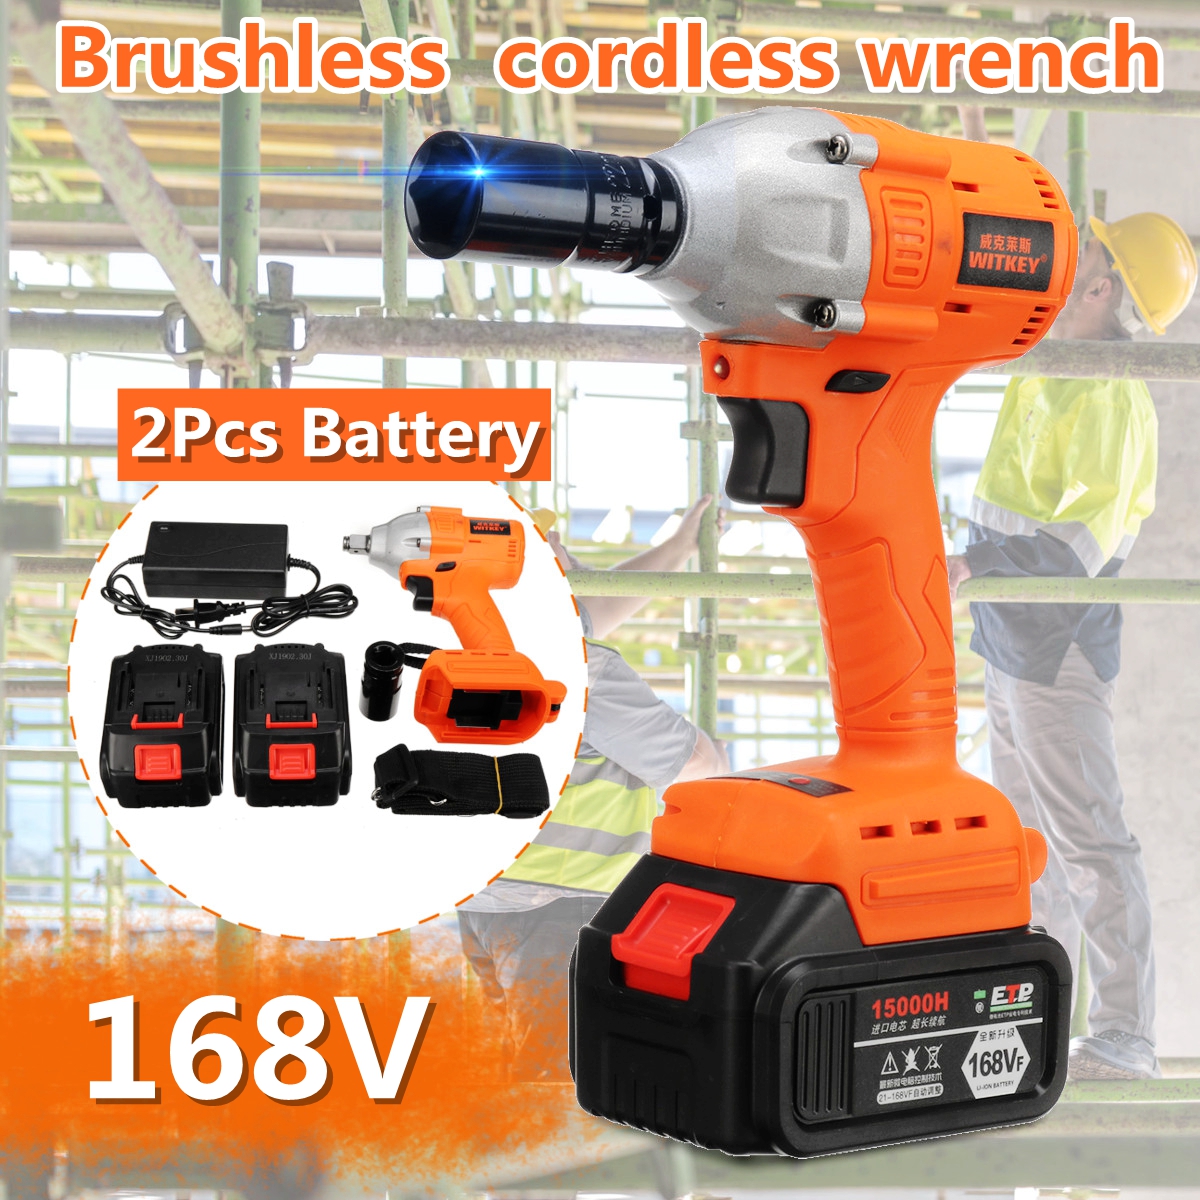 WK-168W-2 168V Cordless Power Wrench Brushless 520Nm Torque Electric Wrench Power Tools